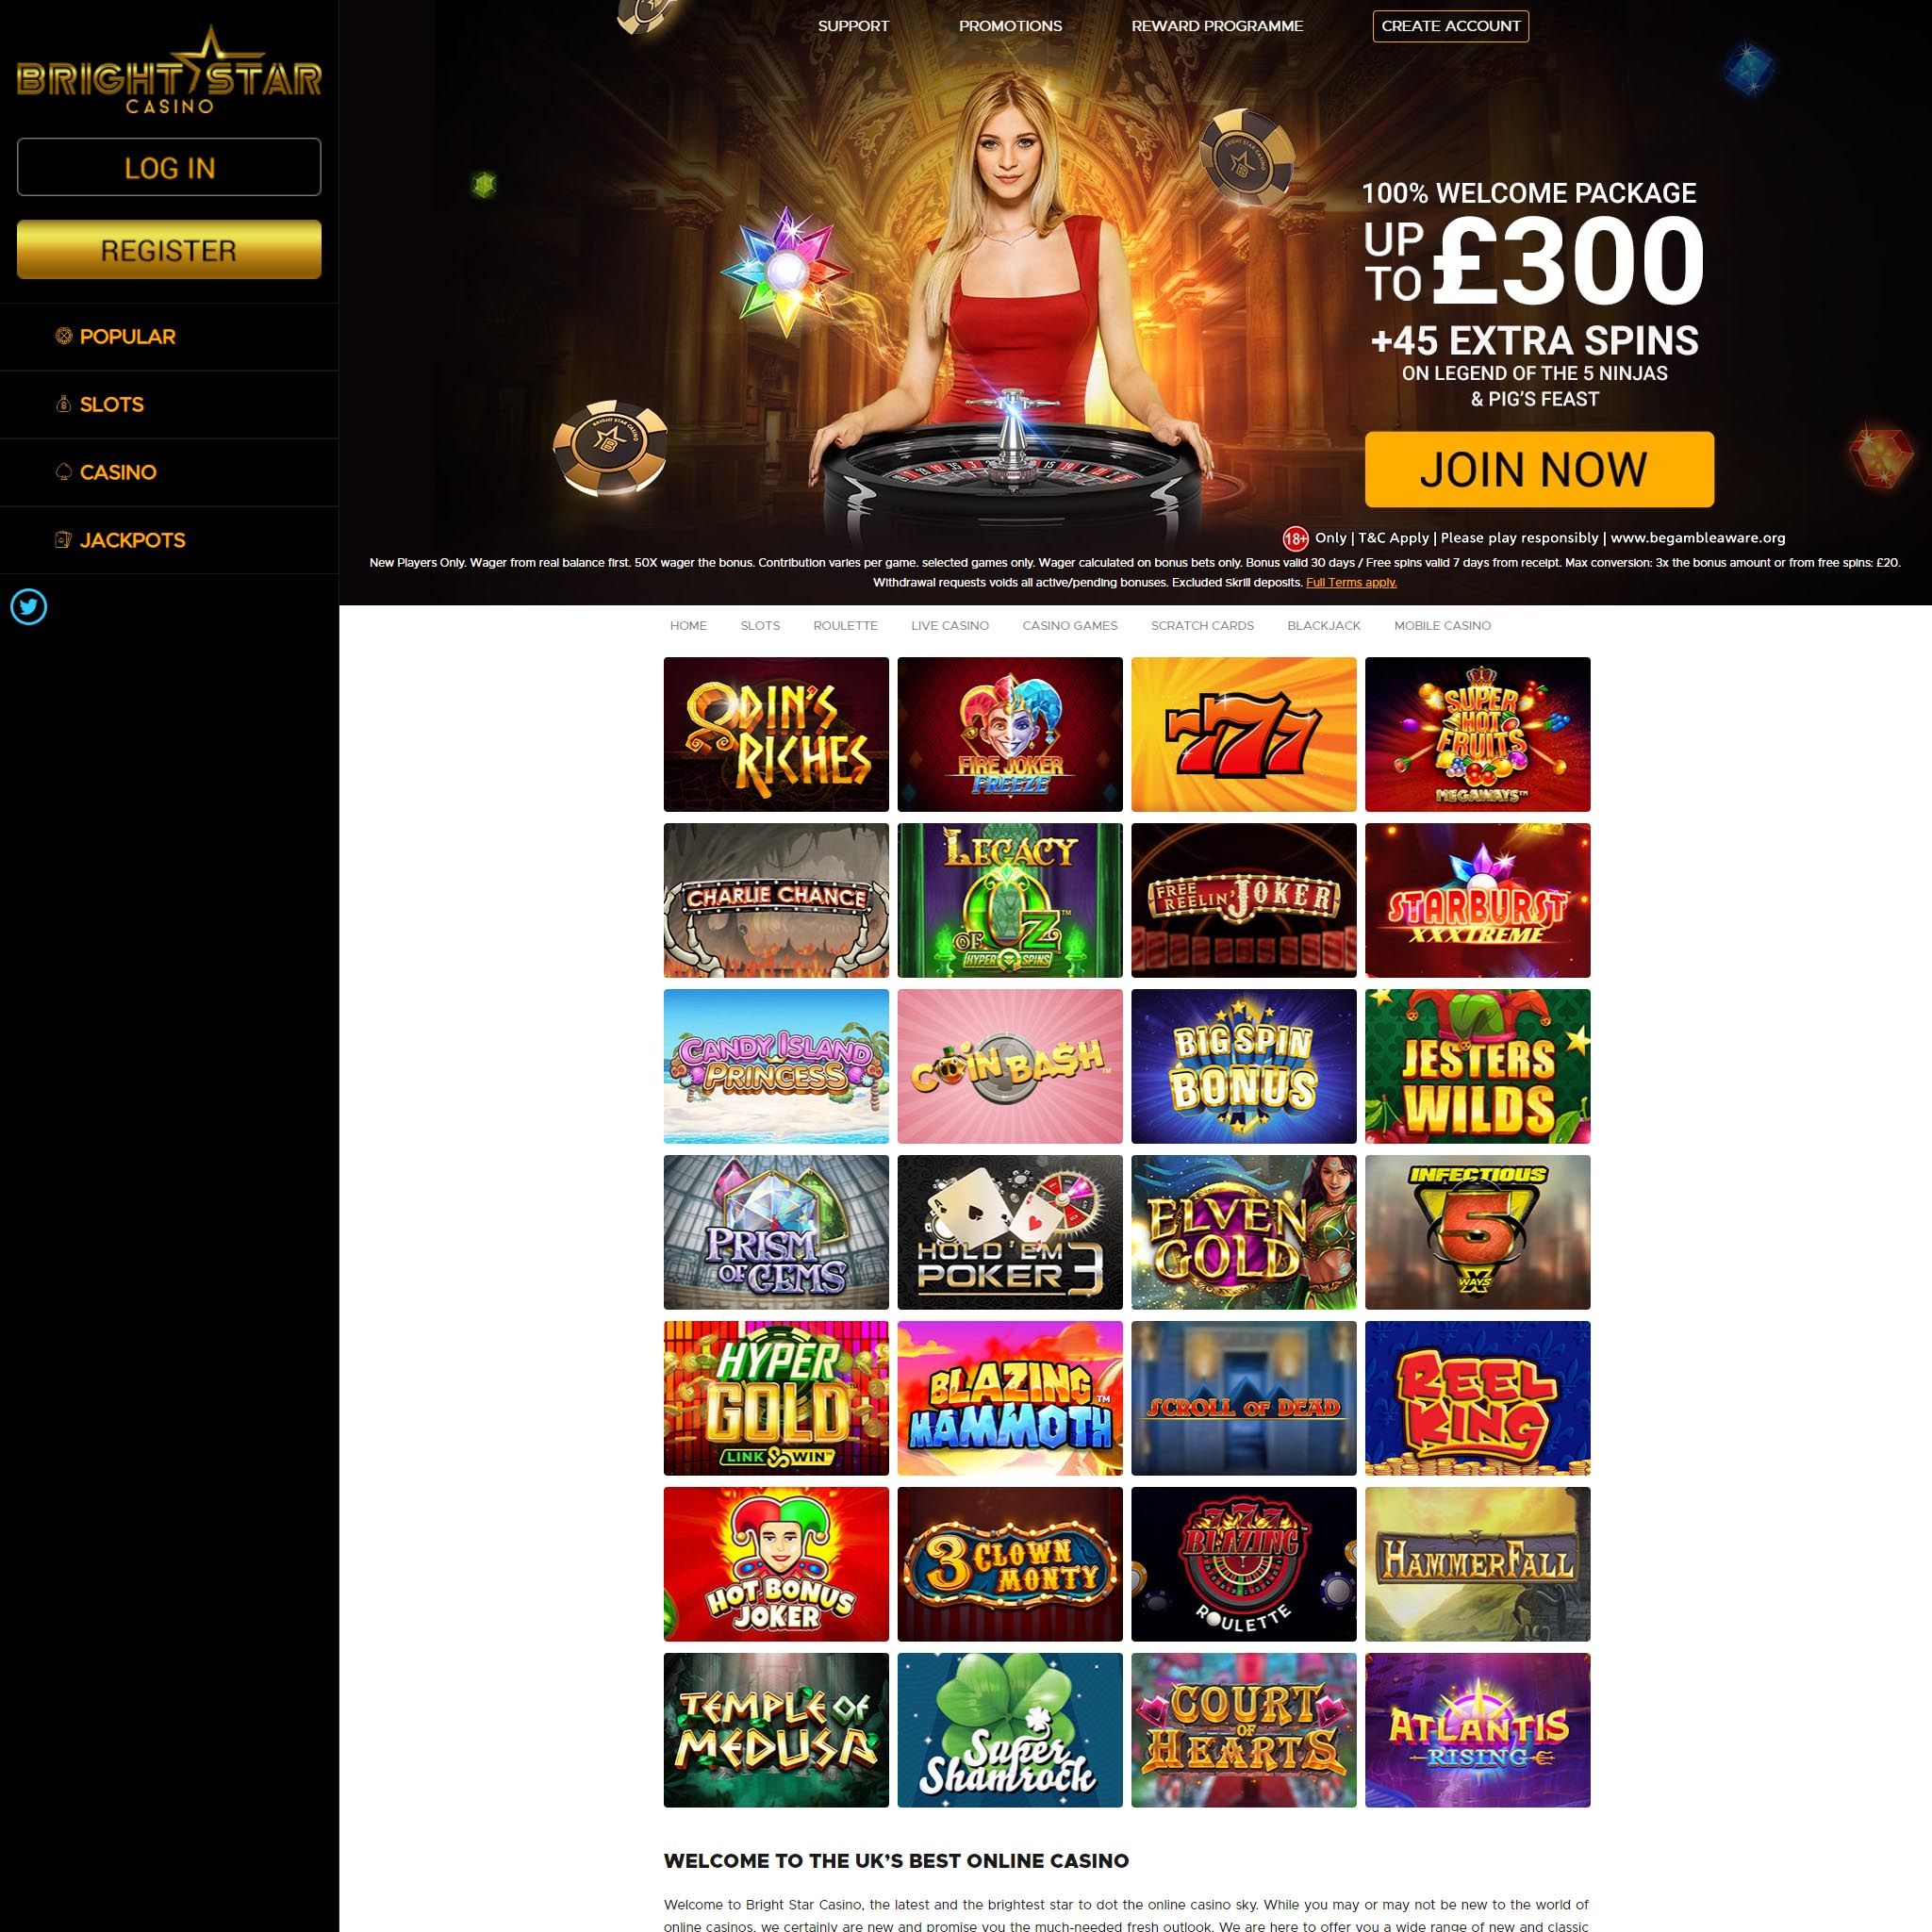 Bright Star Casino review by Mr. Gamble